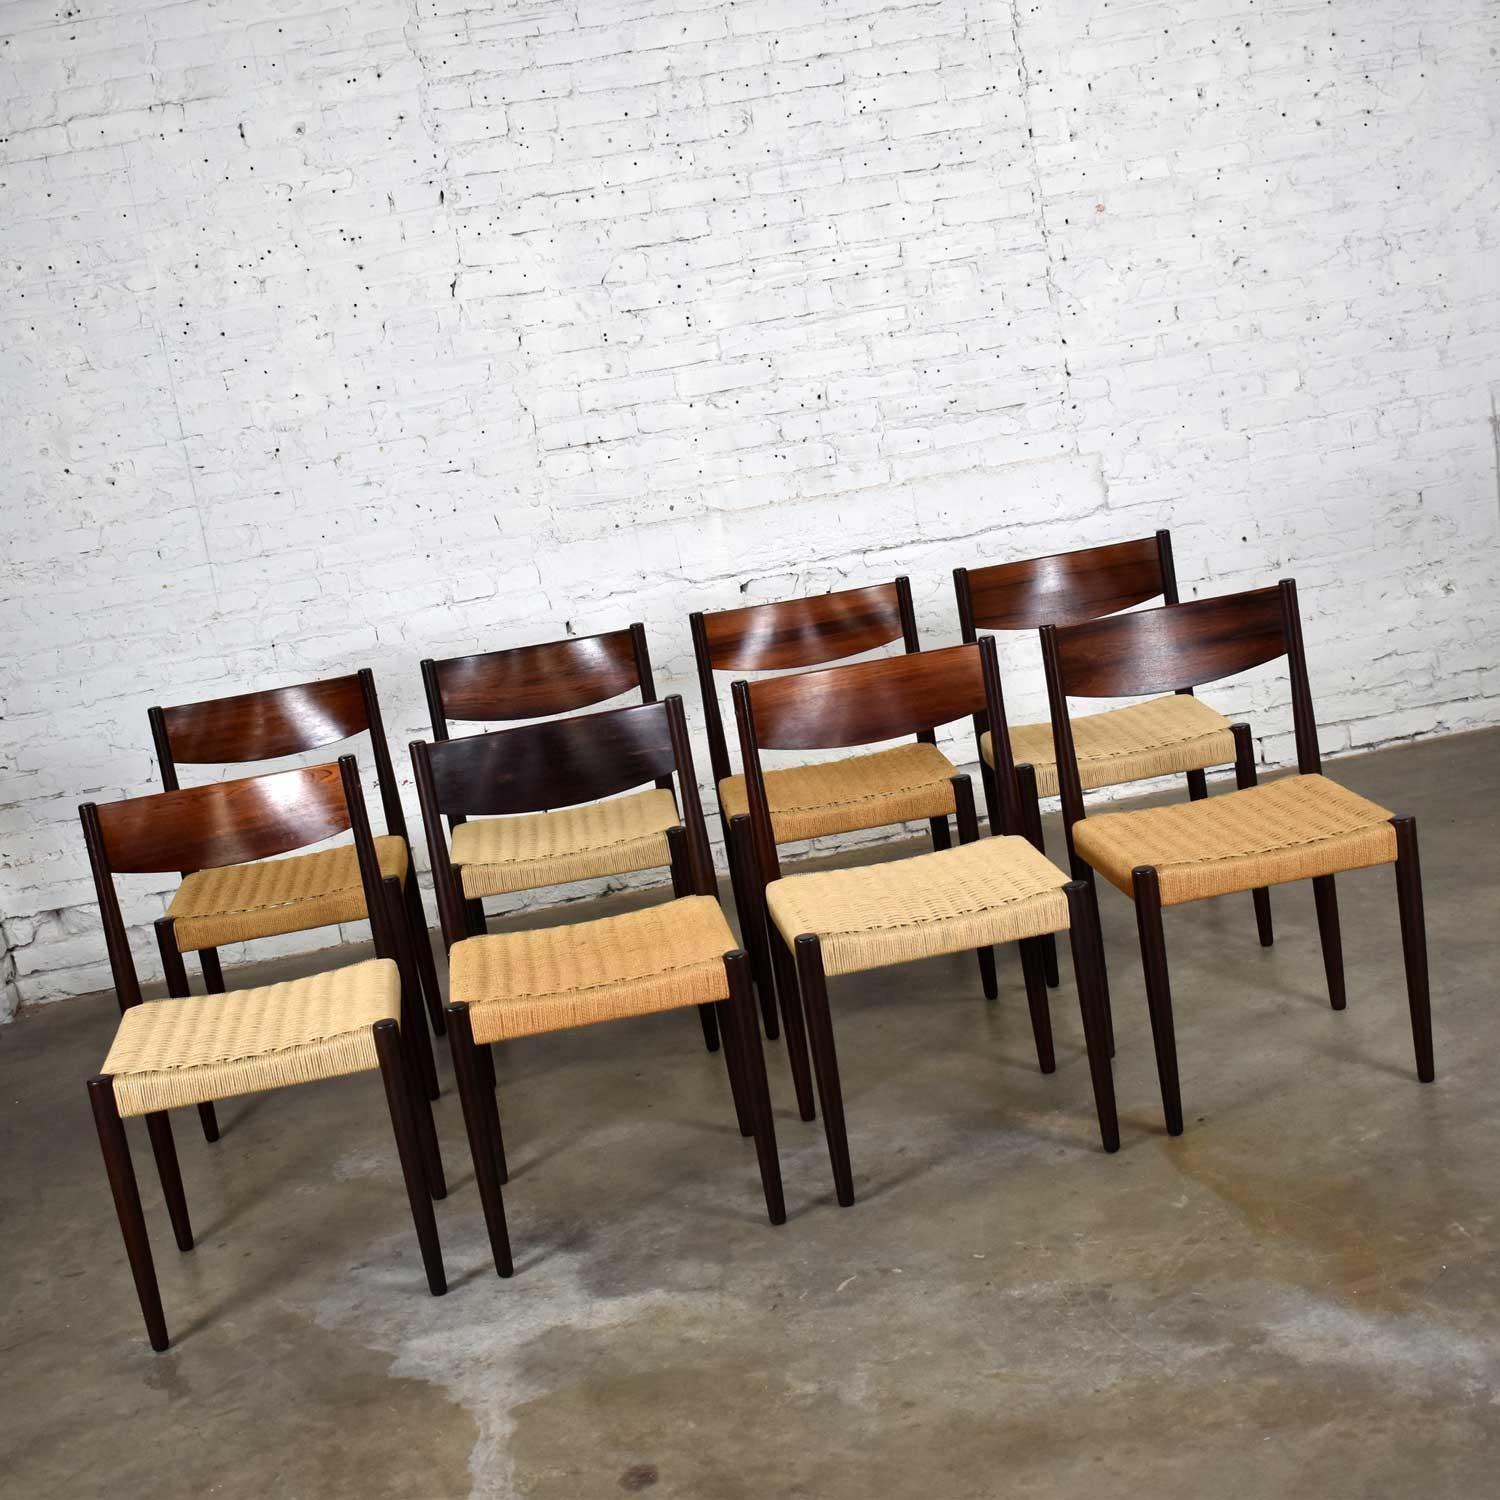 Danish Poul Volther Scandinavian Modern Rosewood Paper Cord Dining Chairs by Frem Røjle